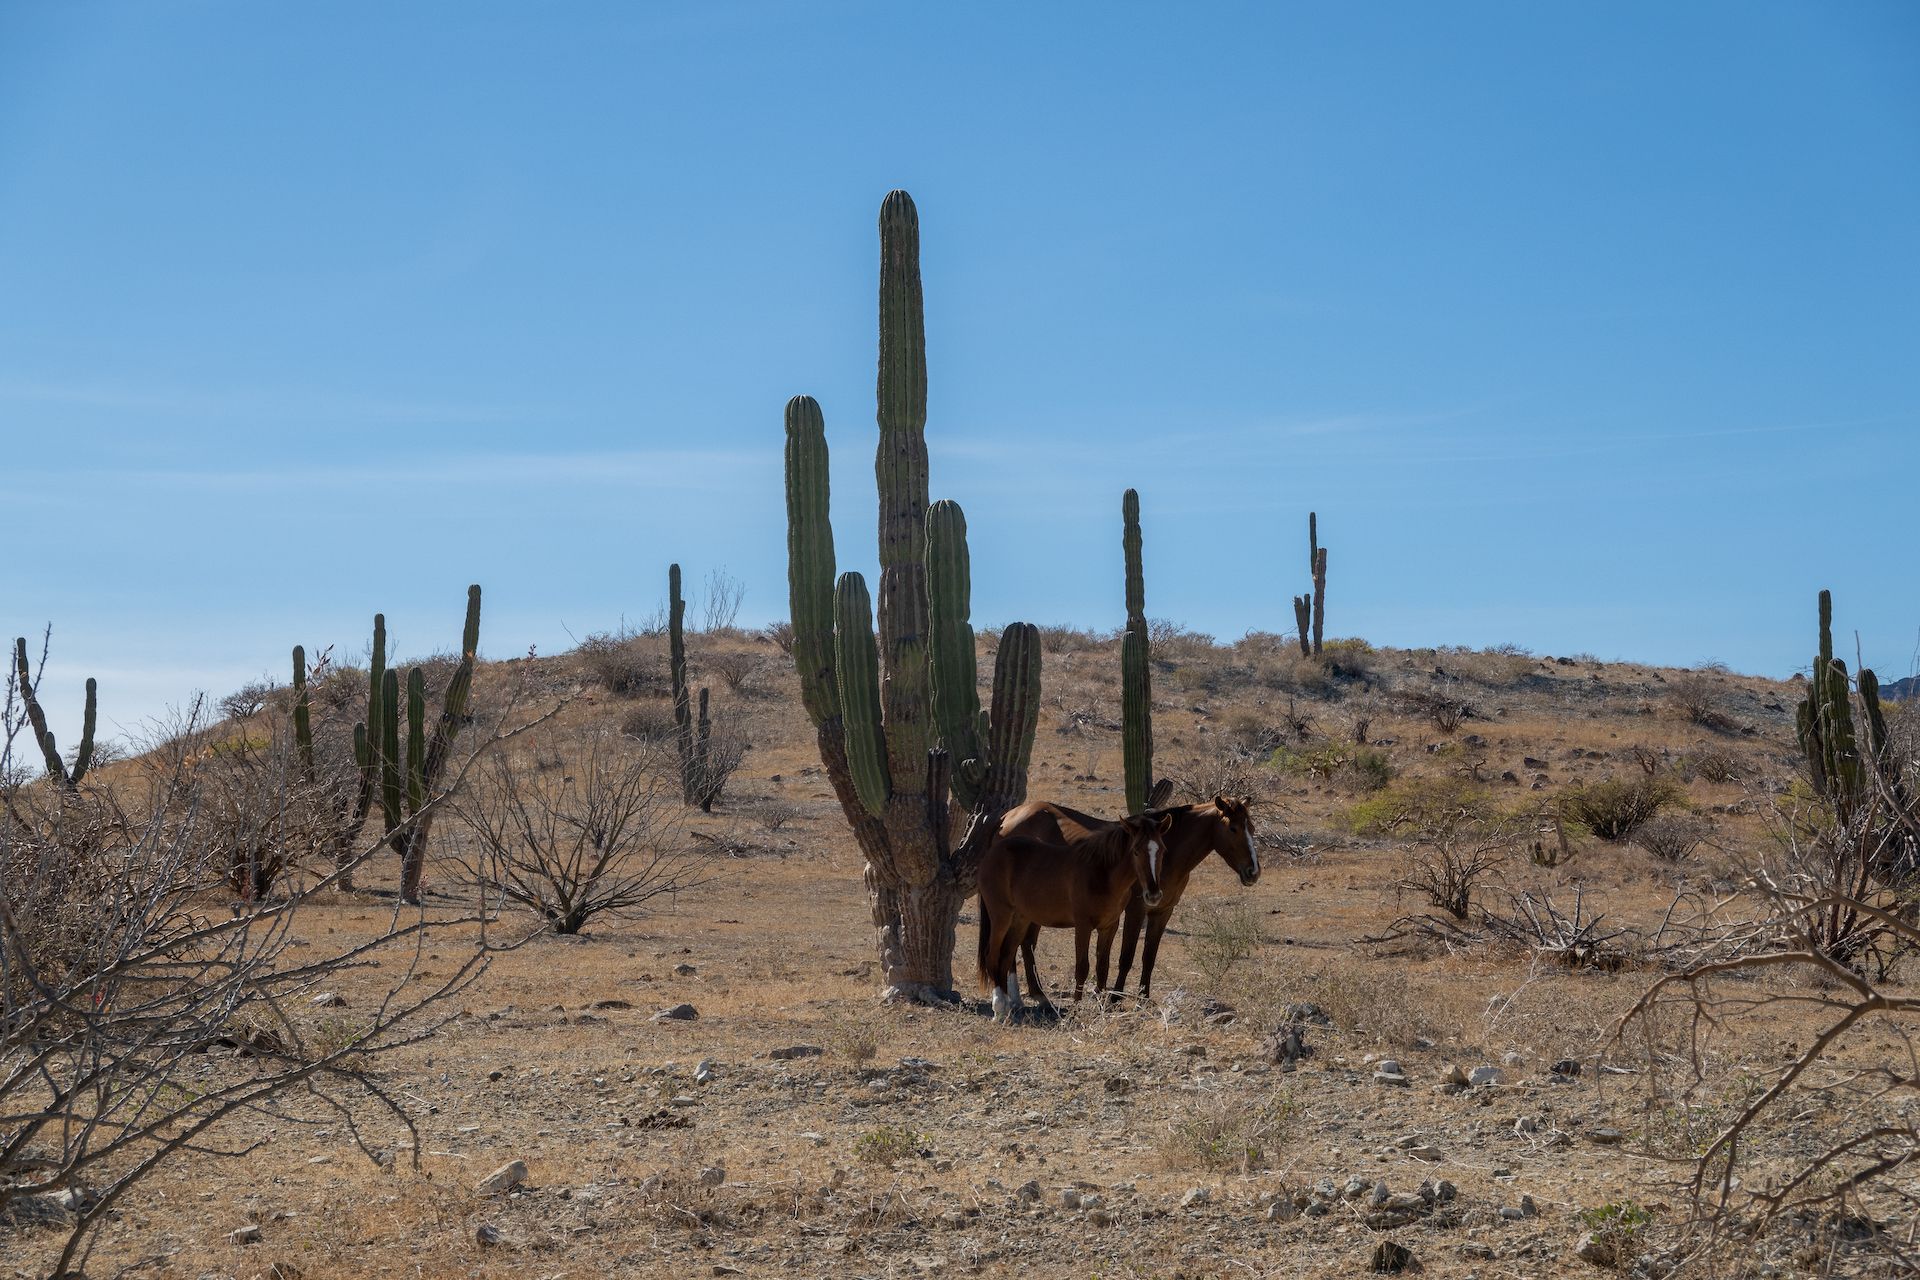 Wild horses resting in the shade of the cactus